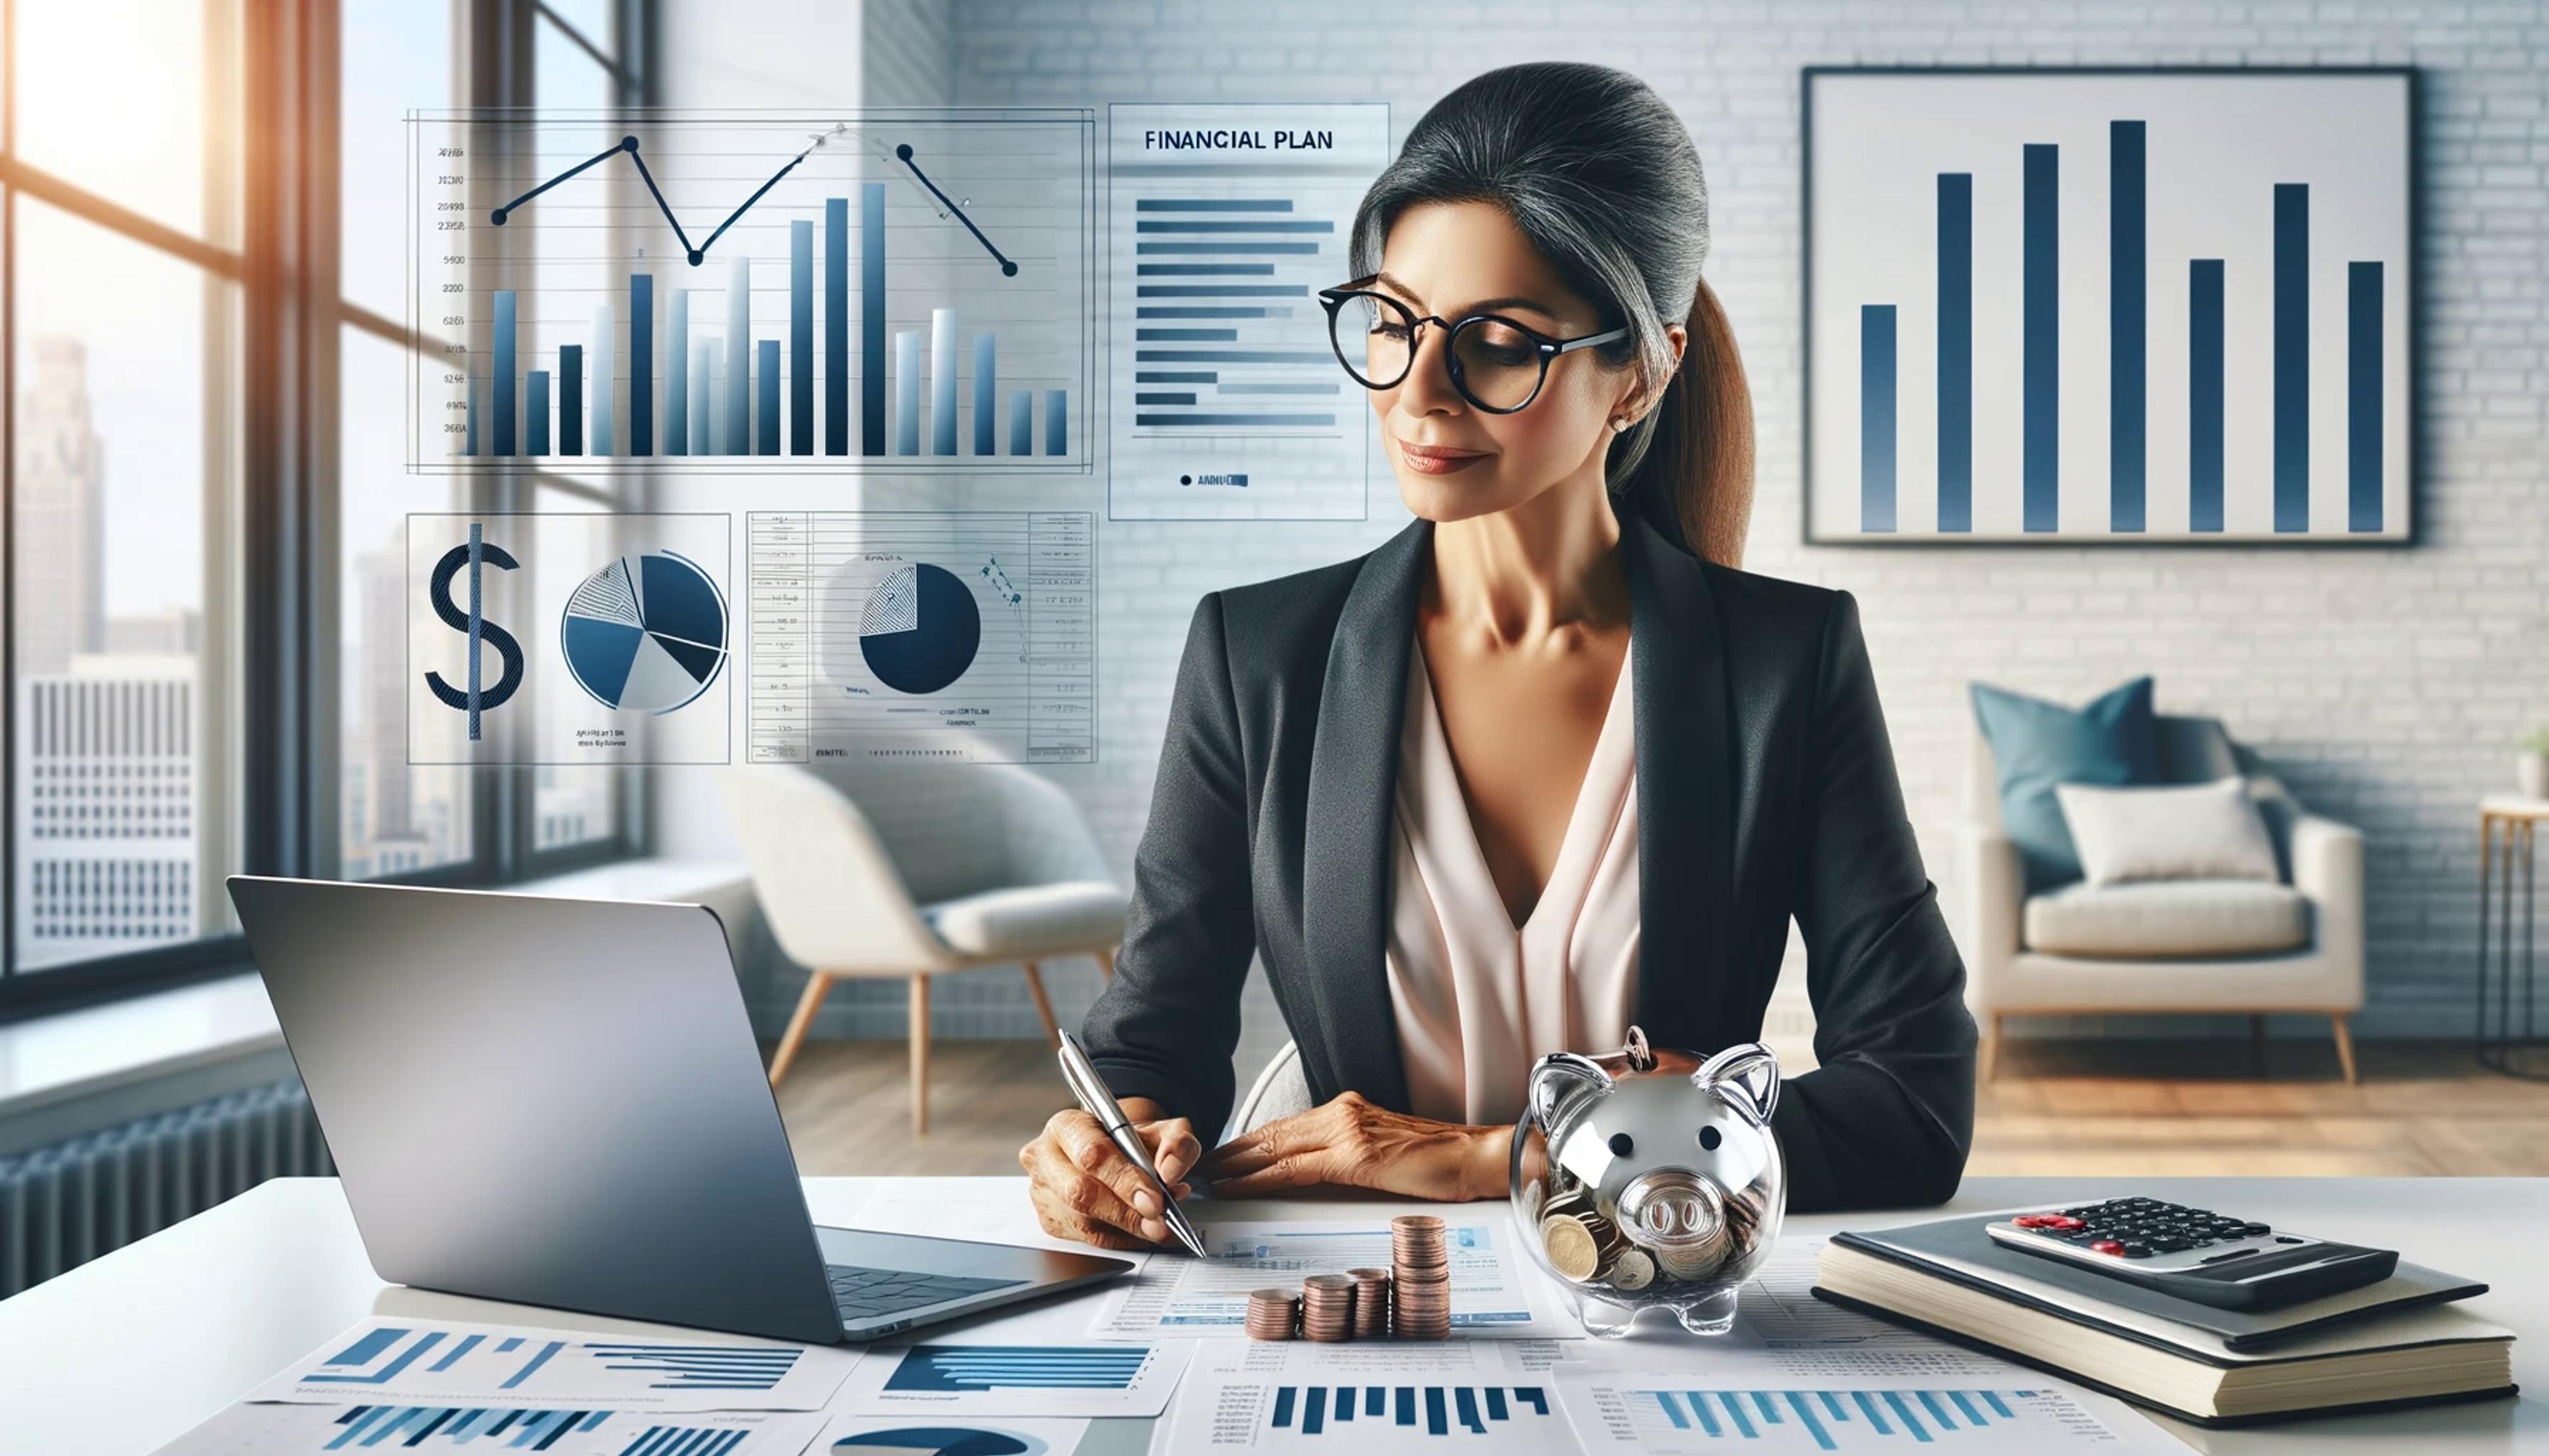 Digital art of a woman working at her desk within a financial setting